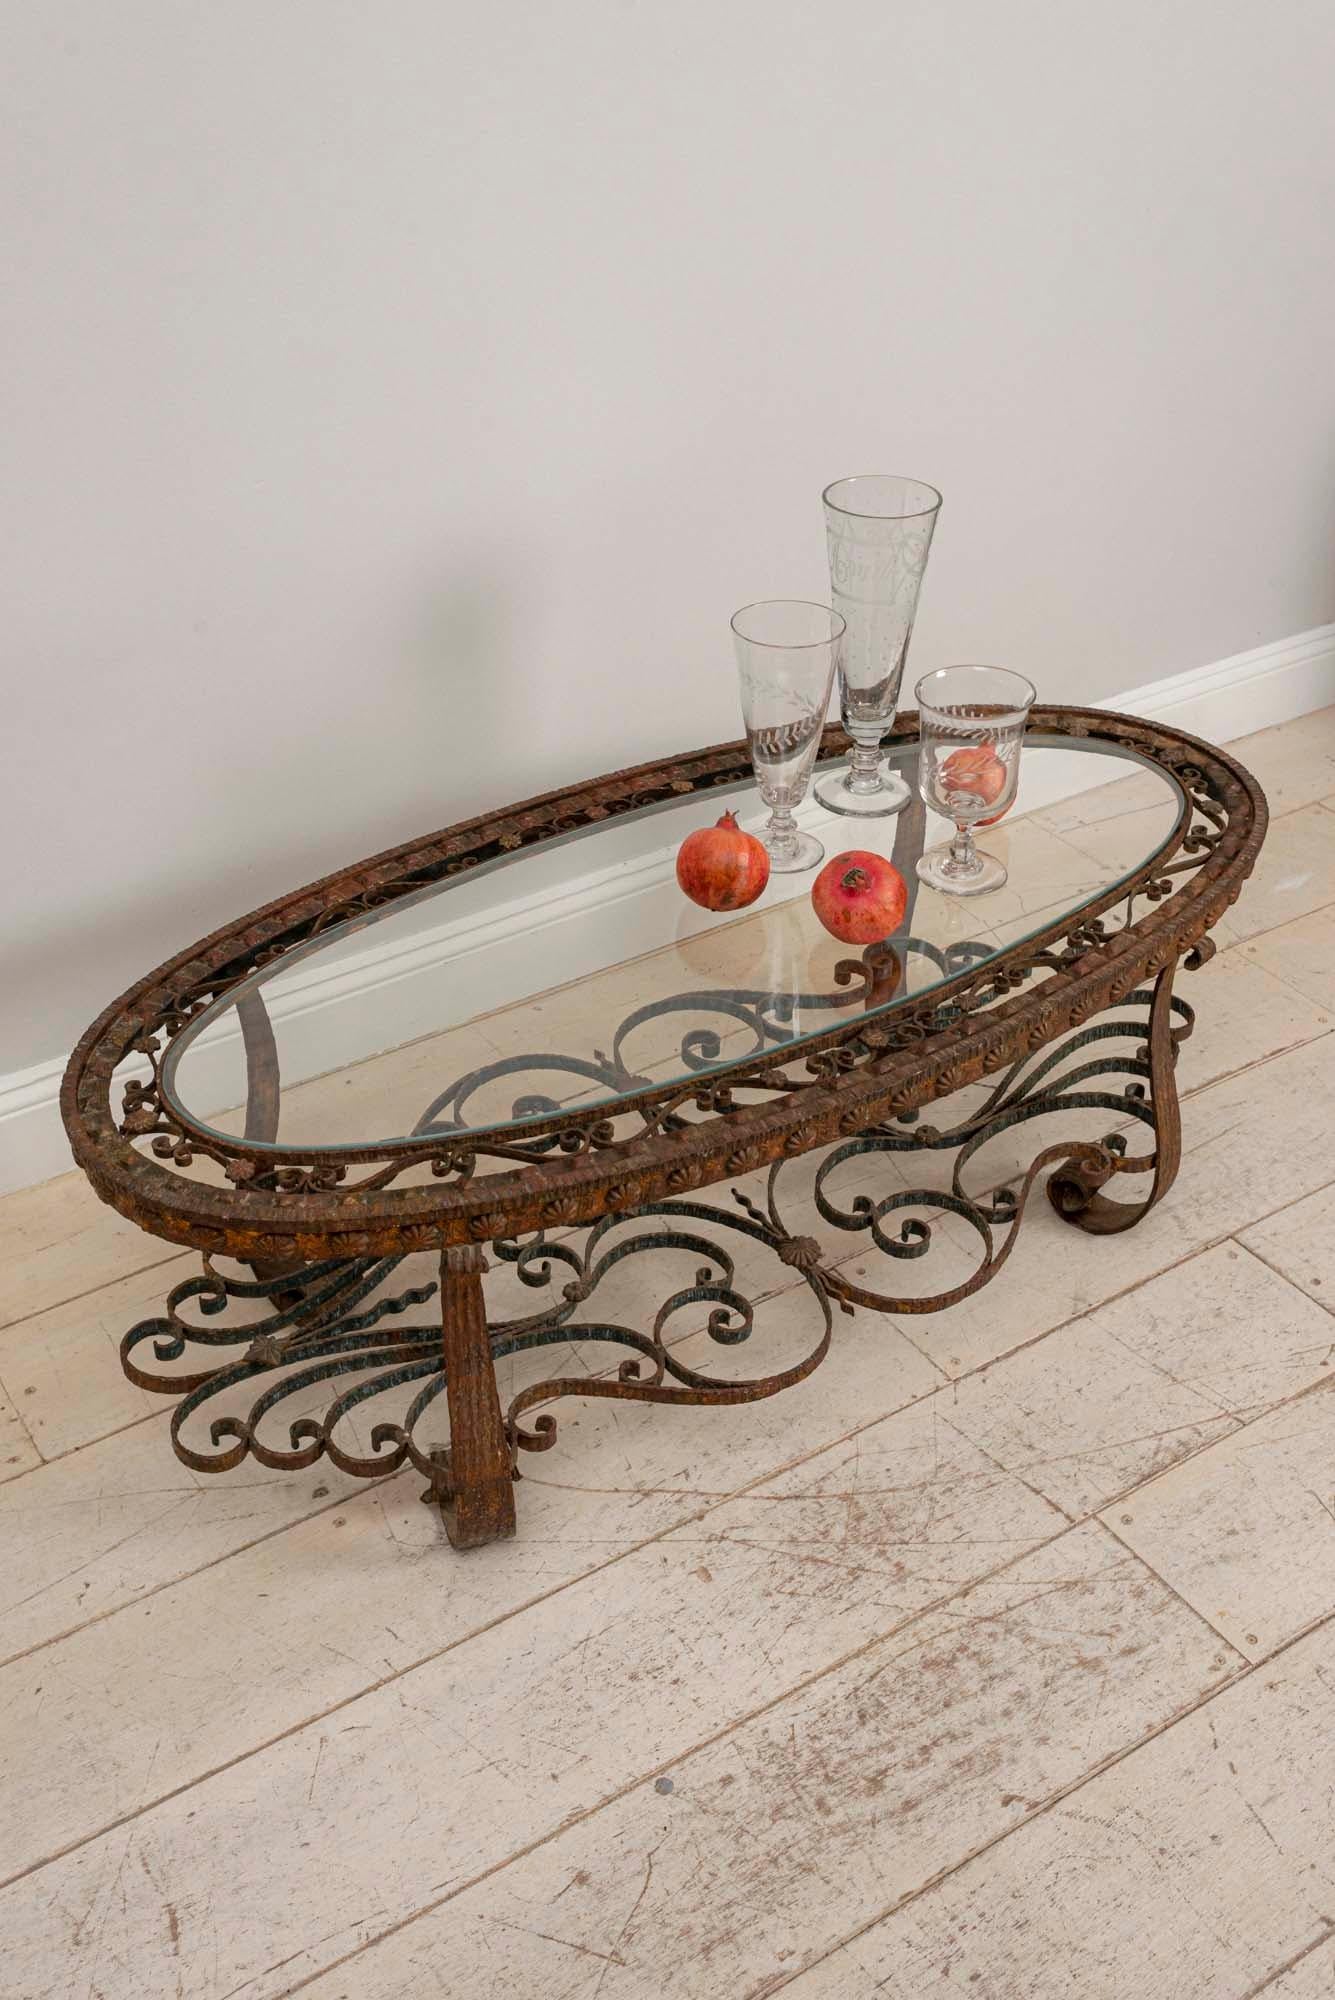 wrought iron glass coffee table